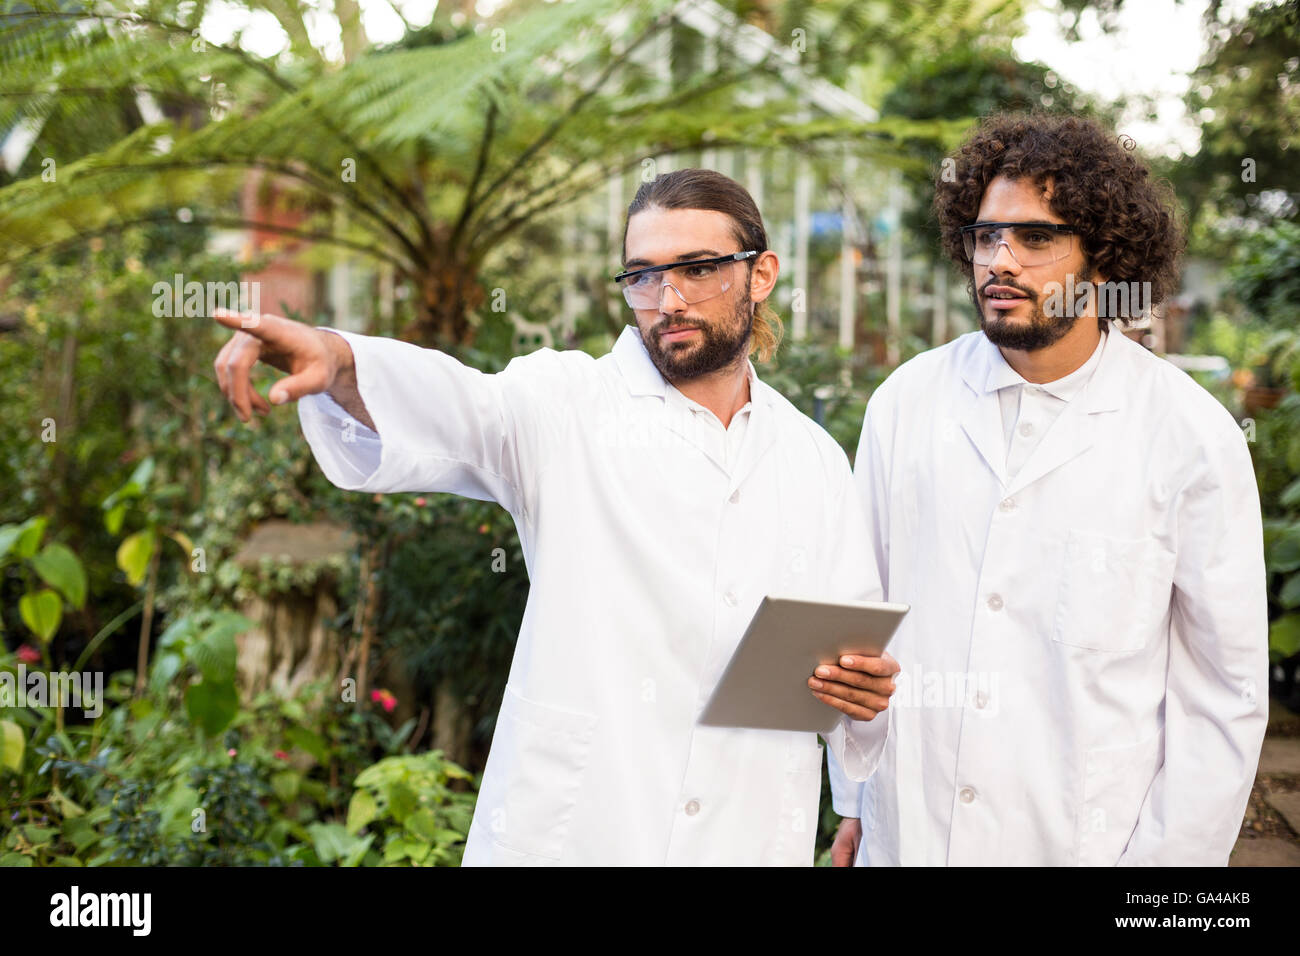 Male scientist pointing while standing by coworker Stock Photo